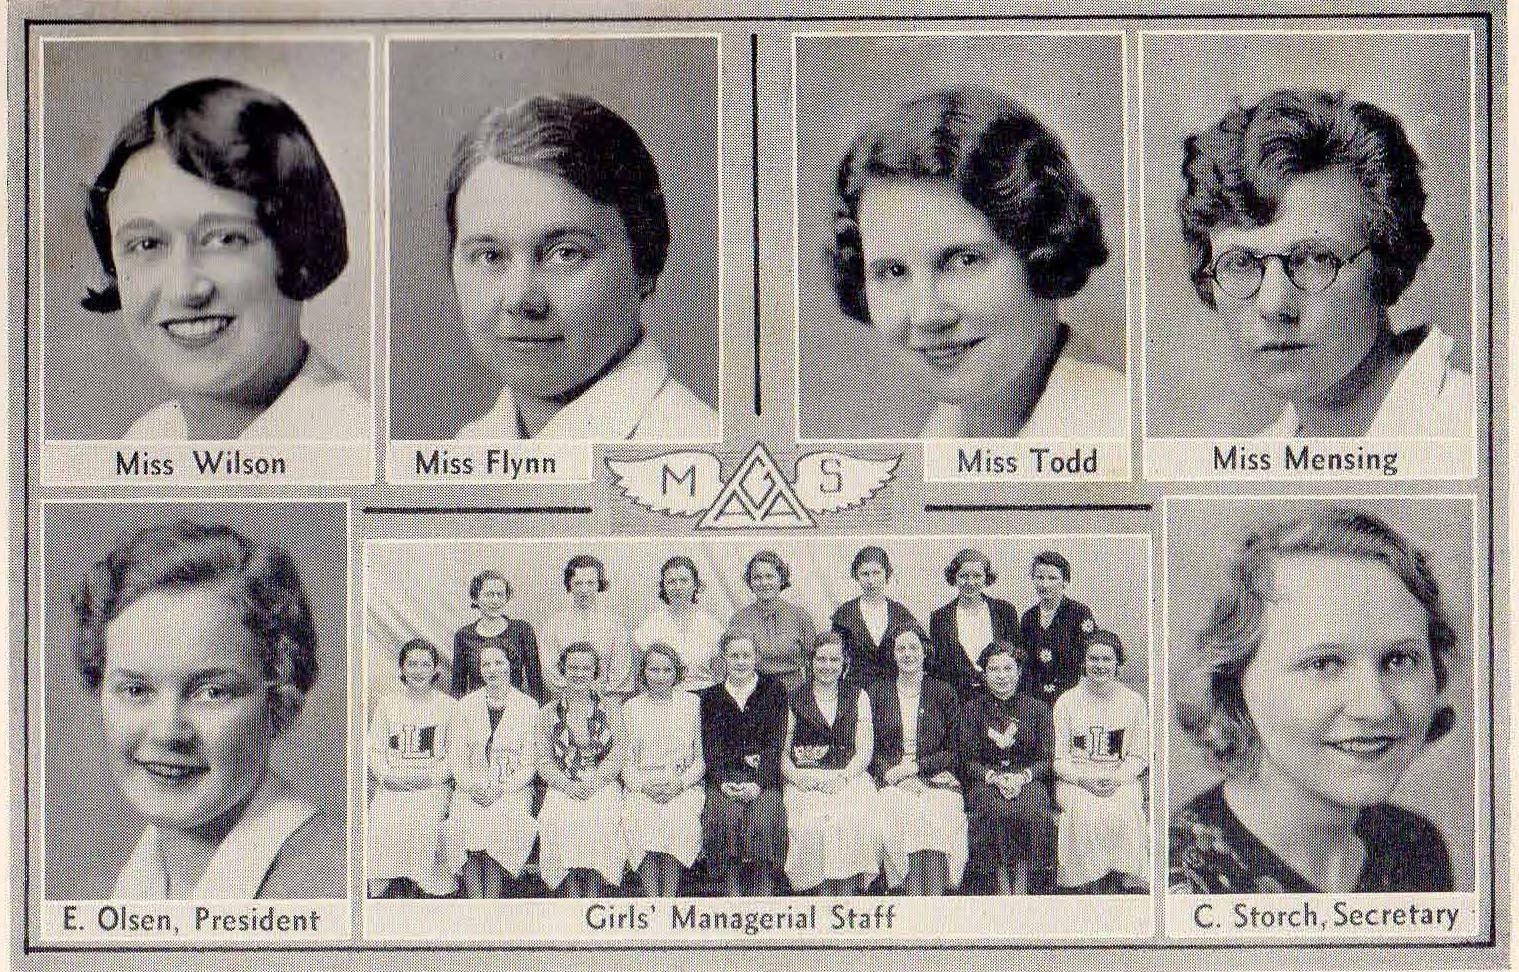 Elaine Olsen and Lowell Coaches & G.A.A. 1933